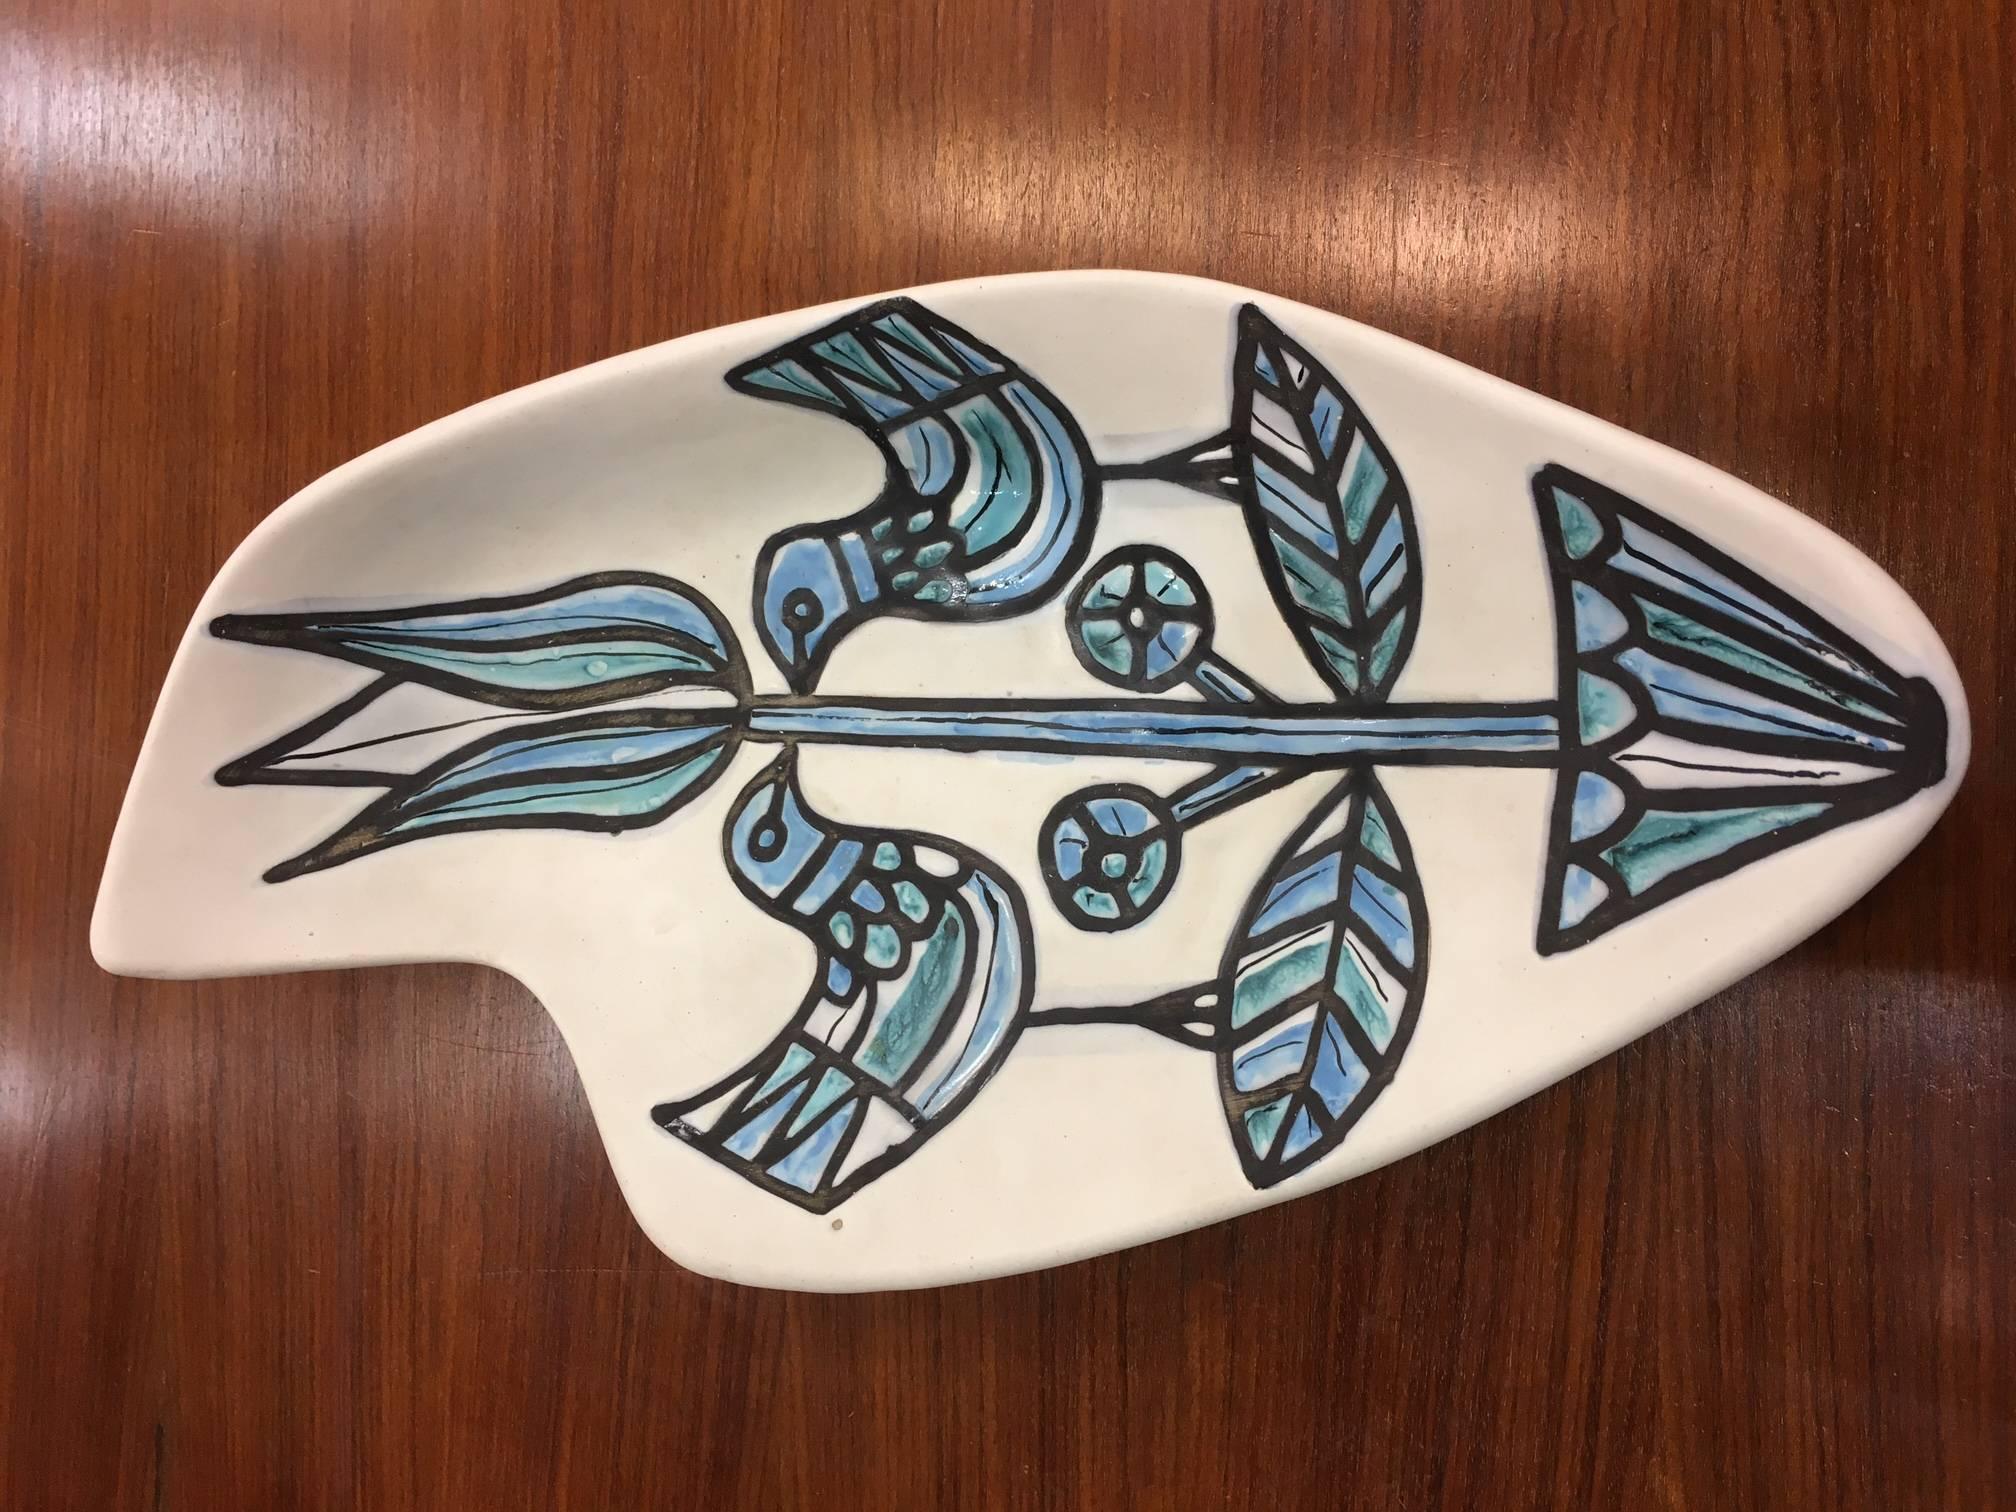 Roger Capron beautiful and large ceramic dish or vide-poche, circa 1960. In excellent condition, signed.